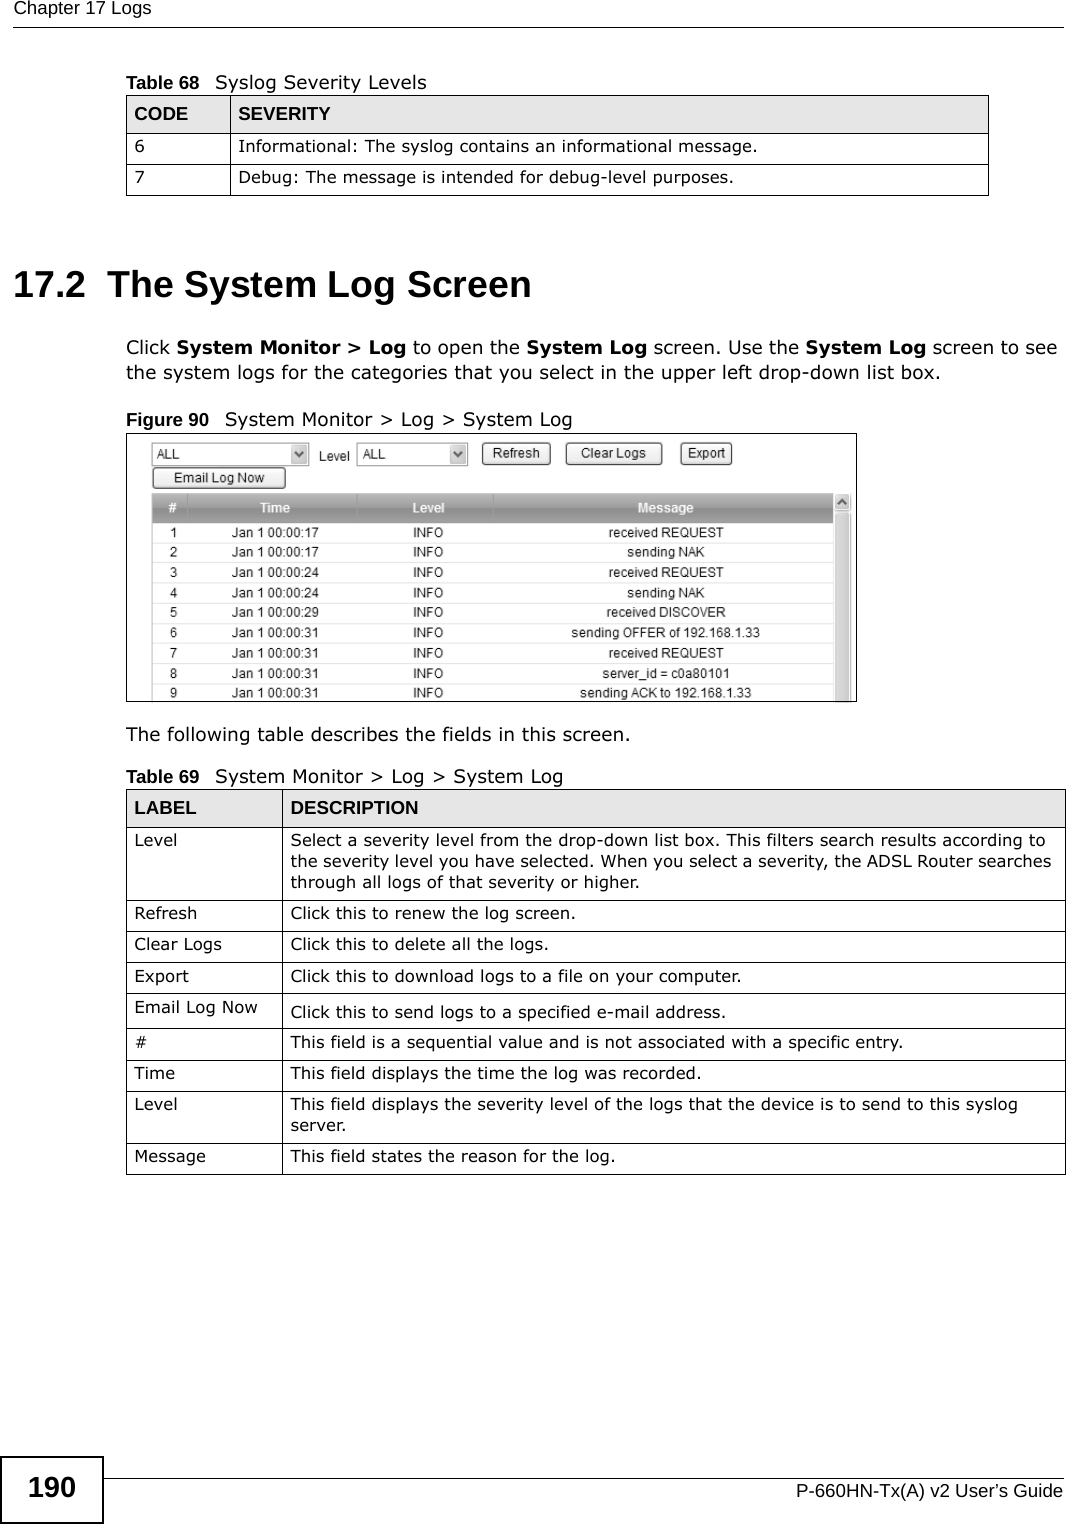 Chapter 17 LogsP-660HN-Tx(A) v2 User’s Guide19017.2  The System Log Screen Click System Monitor &gt; Log to open the System Log screen. Use the System Log screen to see the system logs for the categories that you select in the upper left drop-down list box. Figure 90   System Monitor &gt; Log &gt; System LogThe following table describes the fields in this screen.  6 Informational: The syslog contains an informational message.7 Debug: The message is intended for debug-level purposes.Table 68   Syslog Severity LevelsCODE SEVERITYTable 69   System Monitor &gt; Log &gt; System LogLABEL DESCRIPTIONLevel  Select a severity level from the drop-down list box. This filters search results according to the severity level you have selected. When you select a severity, the ADSL Router searches through all logs of that severity or higher. Refresh Click this to renew the log screen. Clear Logs Click this to delete all the logs. Export Click this to download logs to a file on your computer.Email Log Now Click this to send logs to a specified e-mail address.#This field is a sequential value and is not associated with a specific entry.Time  This field displays the time the log was recorded. Level This field displays the severity level of the logs that the device is to send to this syslog server.Message This field states the reason for the log.